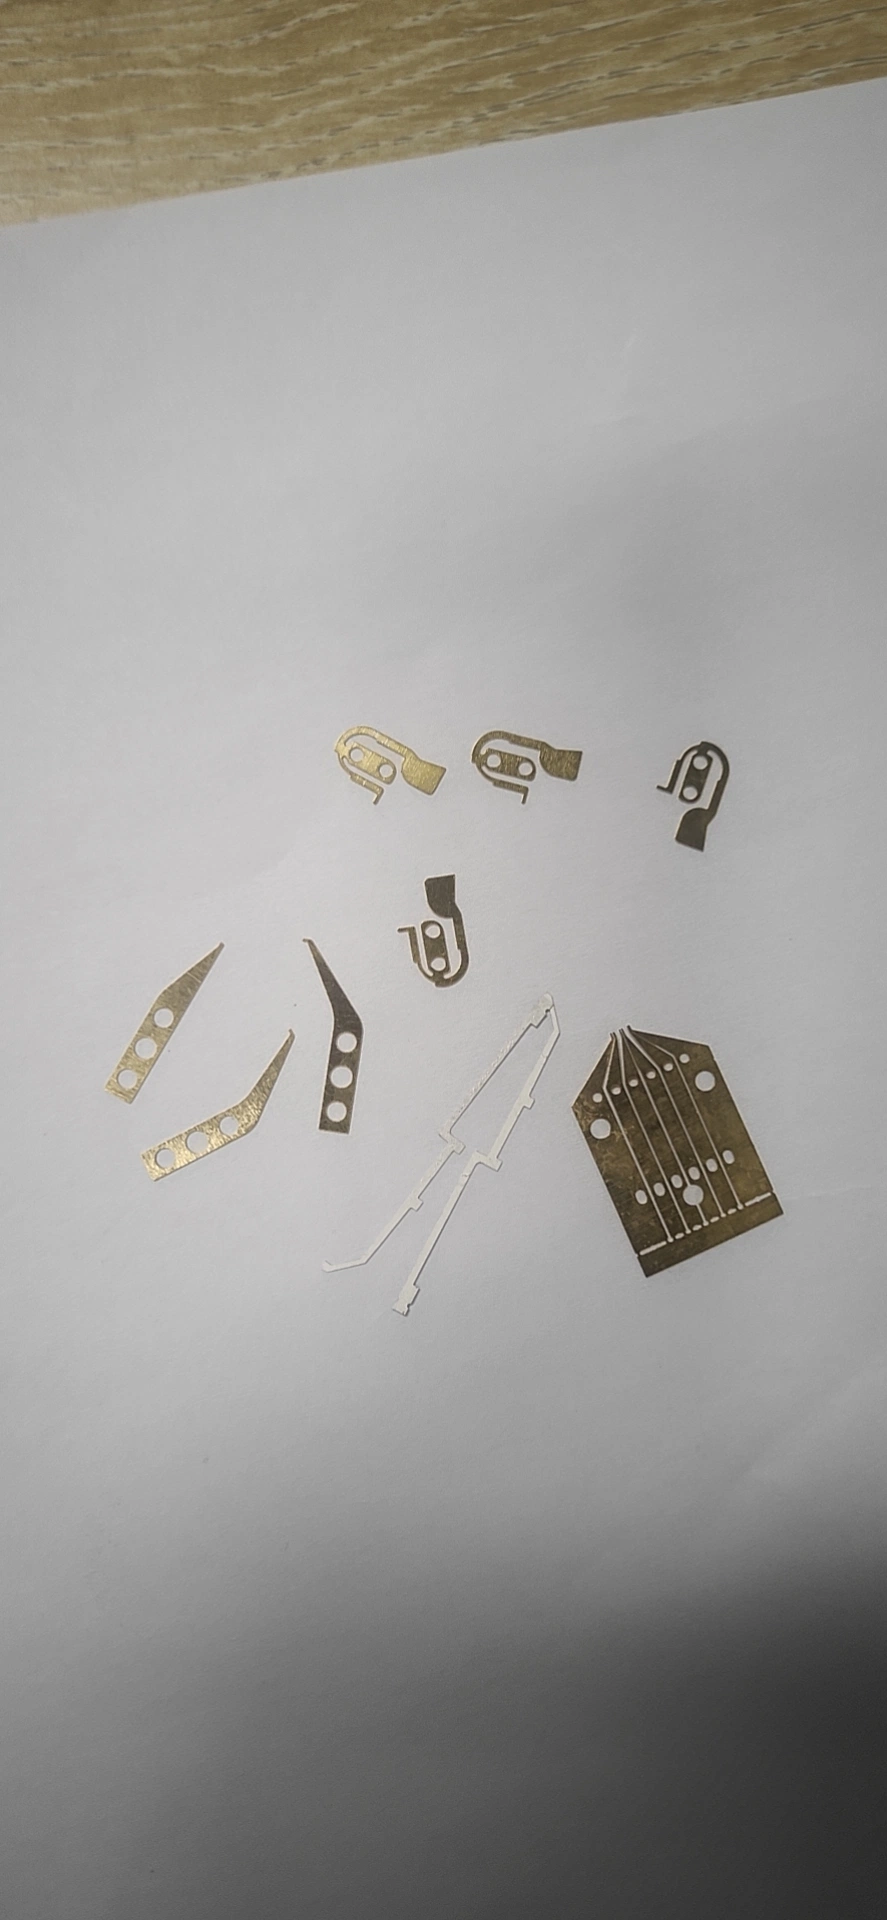 Customized Semiconductor, Integarted Circuits Test Fingers, Contact Fingers for Testing